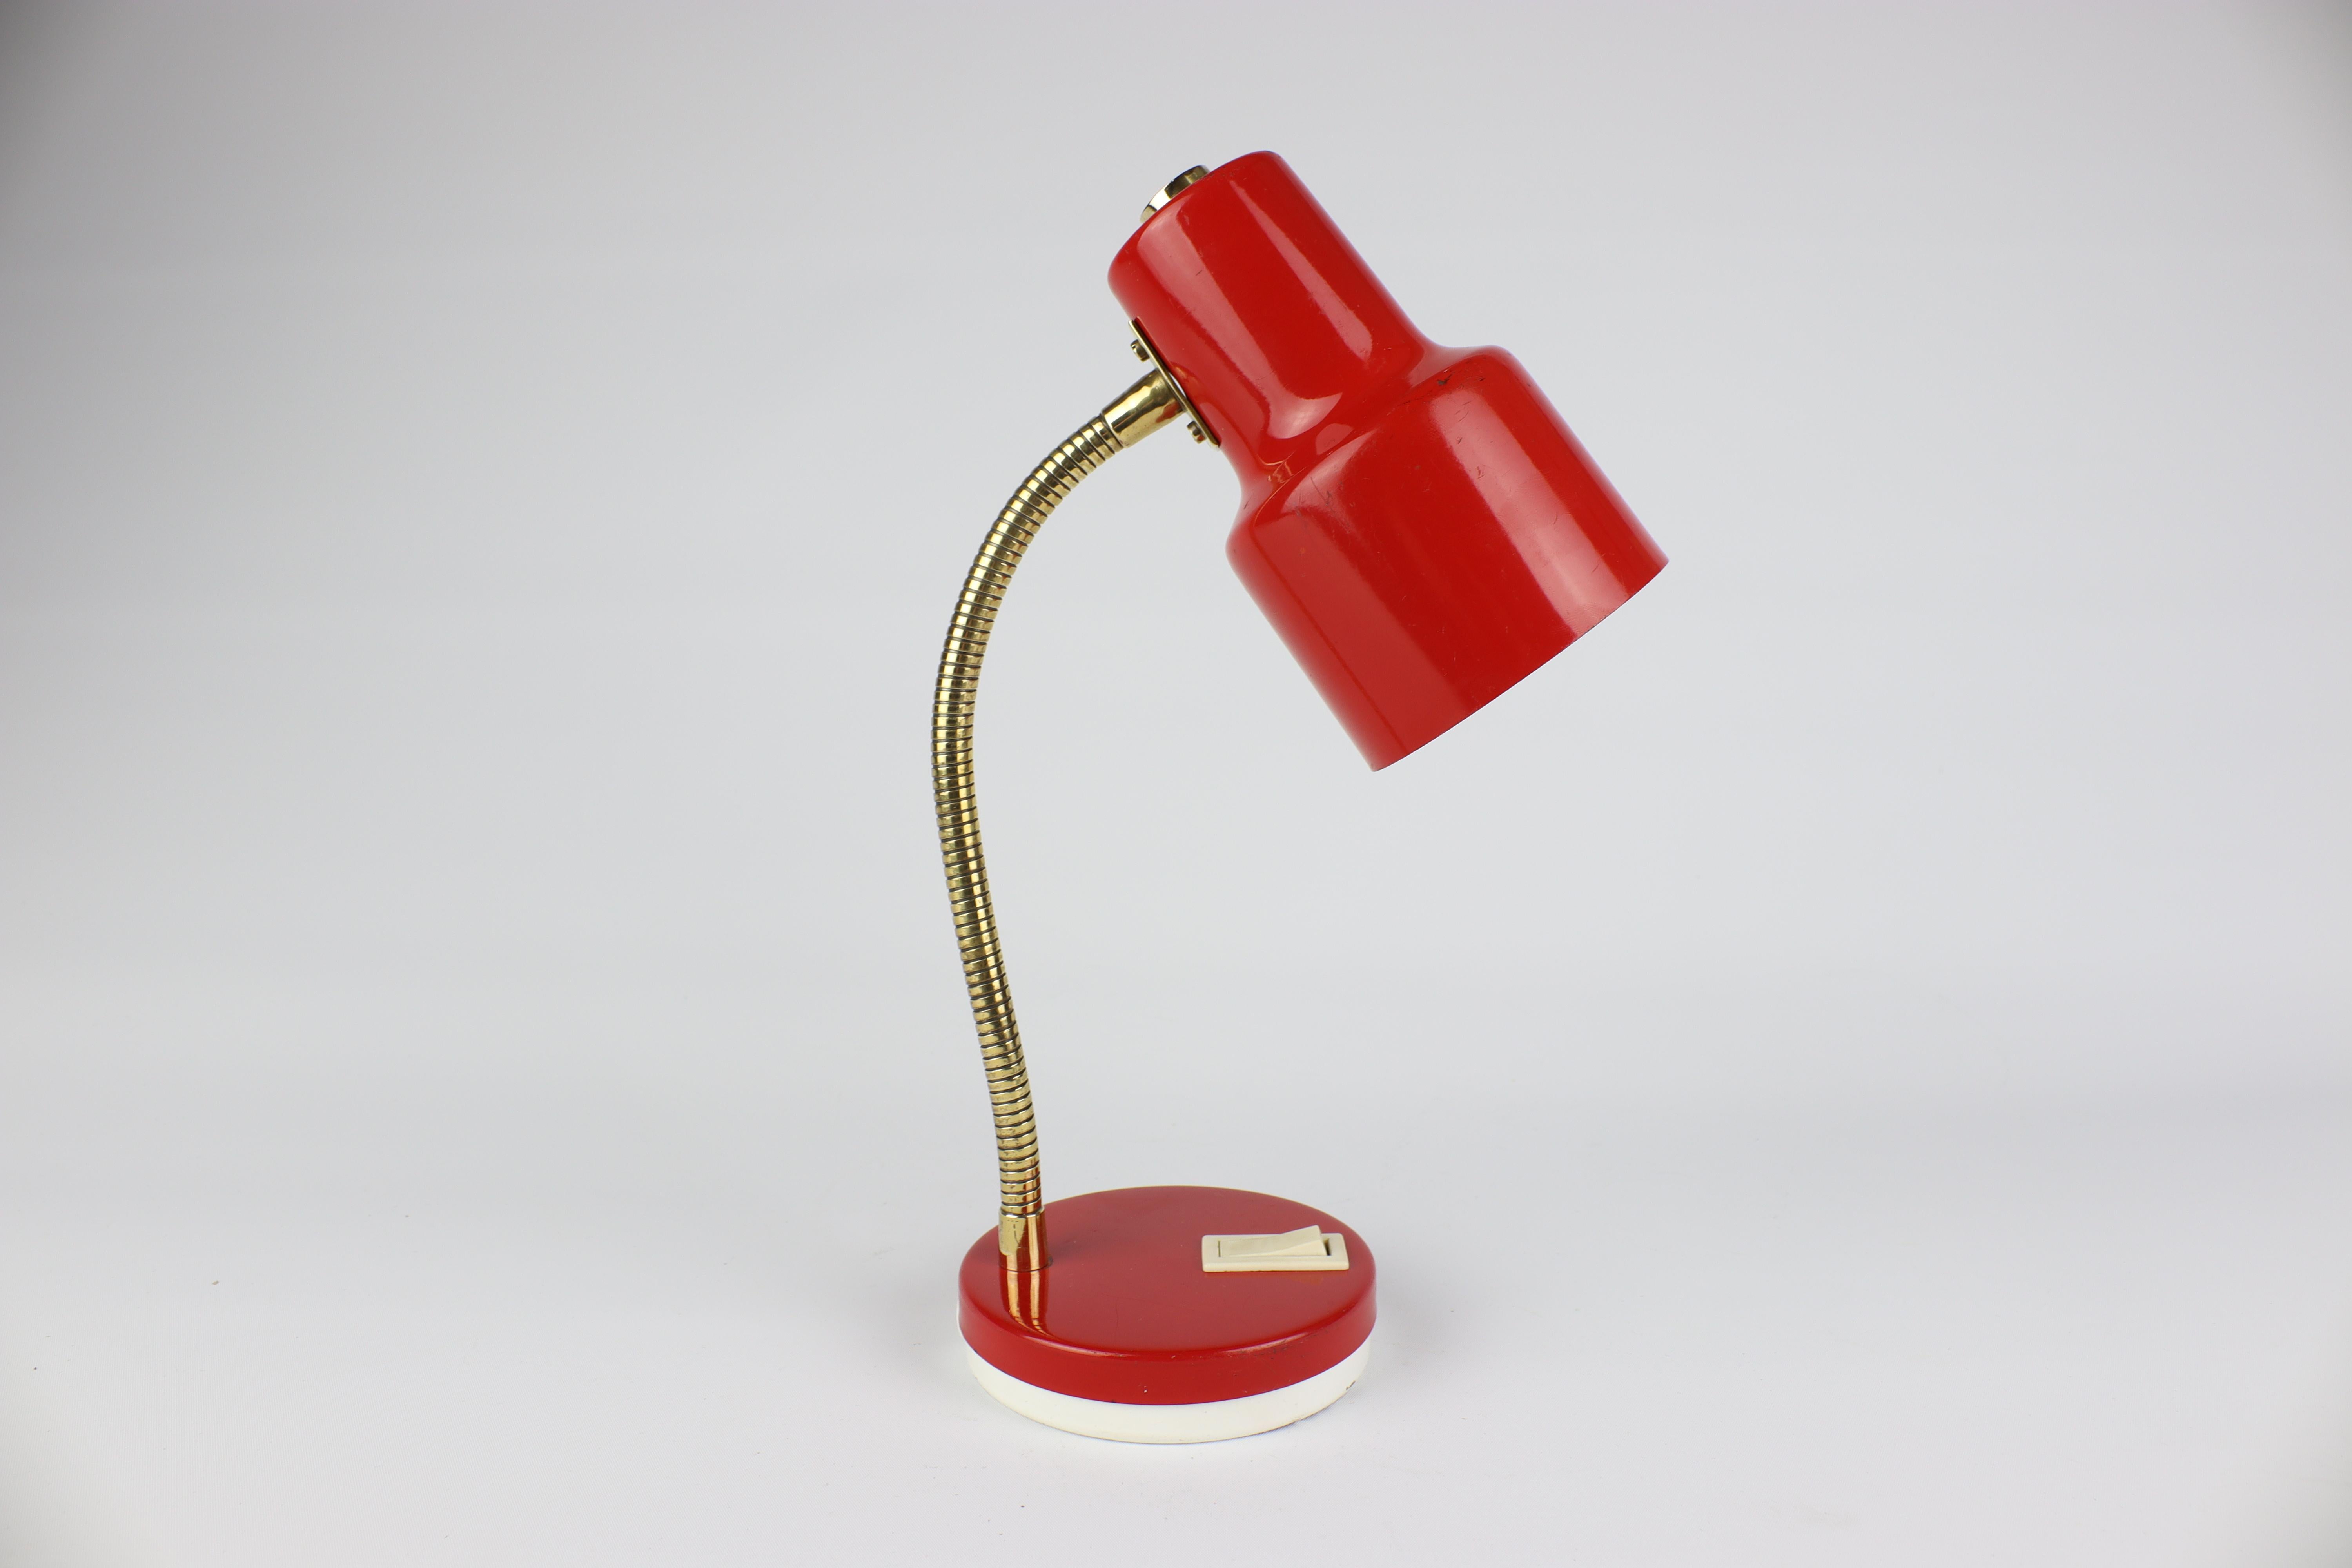 You will fall in love with this lamp thanks to its elegant all-metal design, which is dominated by red. The luminaire is complemented by a brass foot in the form of a gooseneck, which harmonizes with the overall design and allows the lamp to be